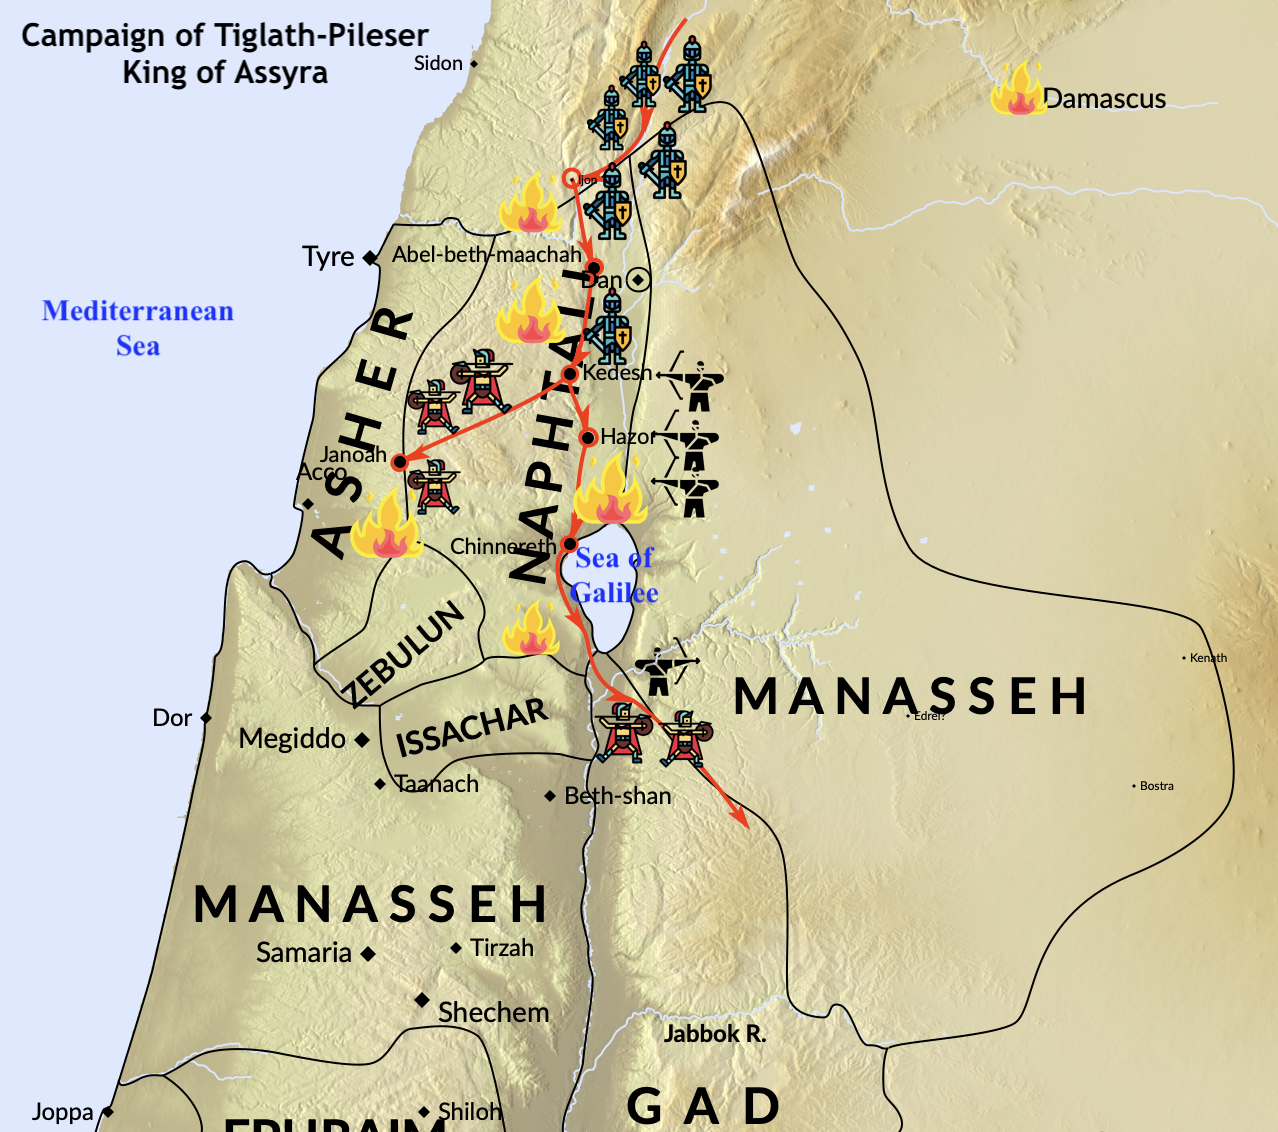 A map of the campaign of Tiglath-Pileser into the kingdom of Israel.